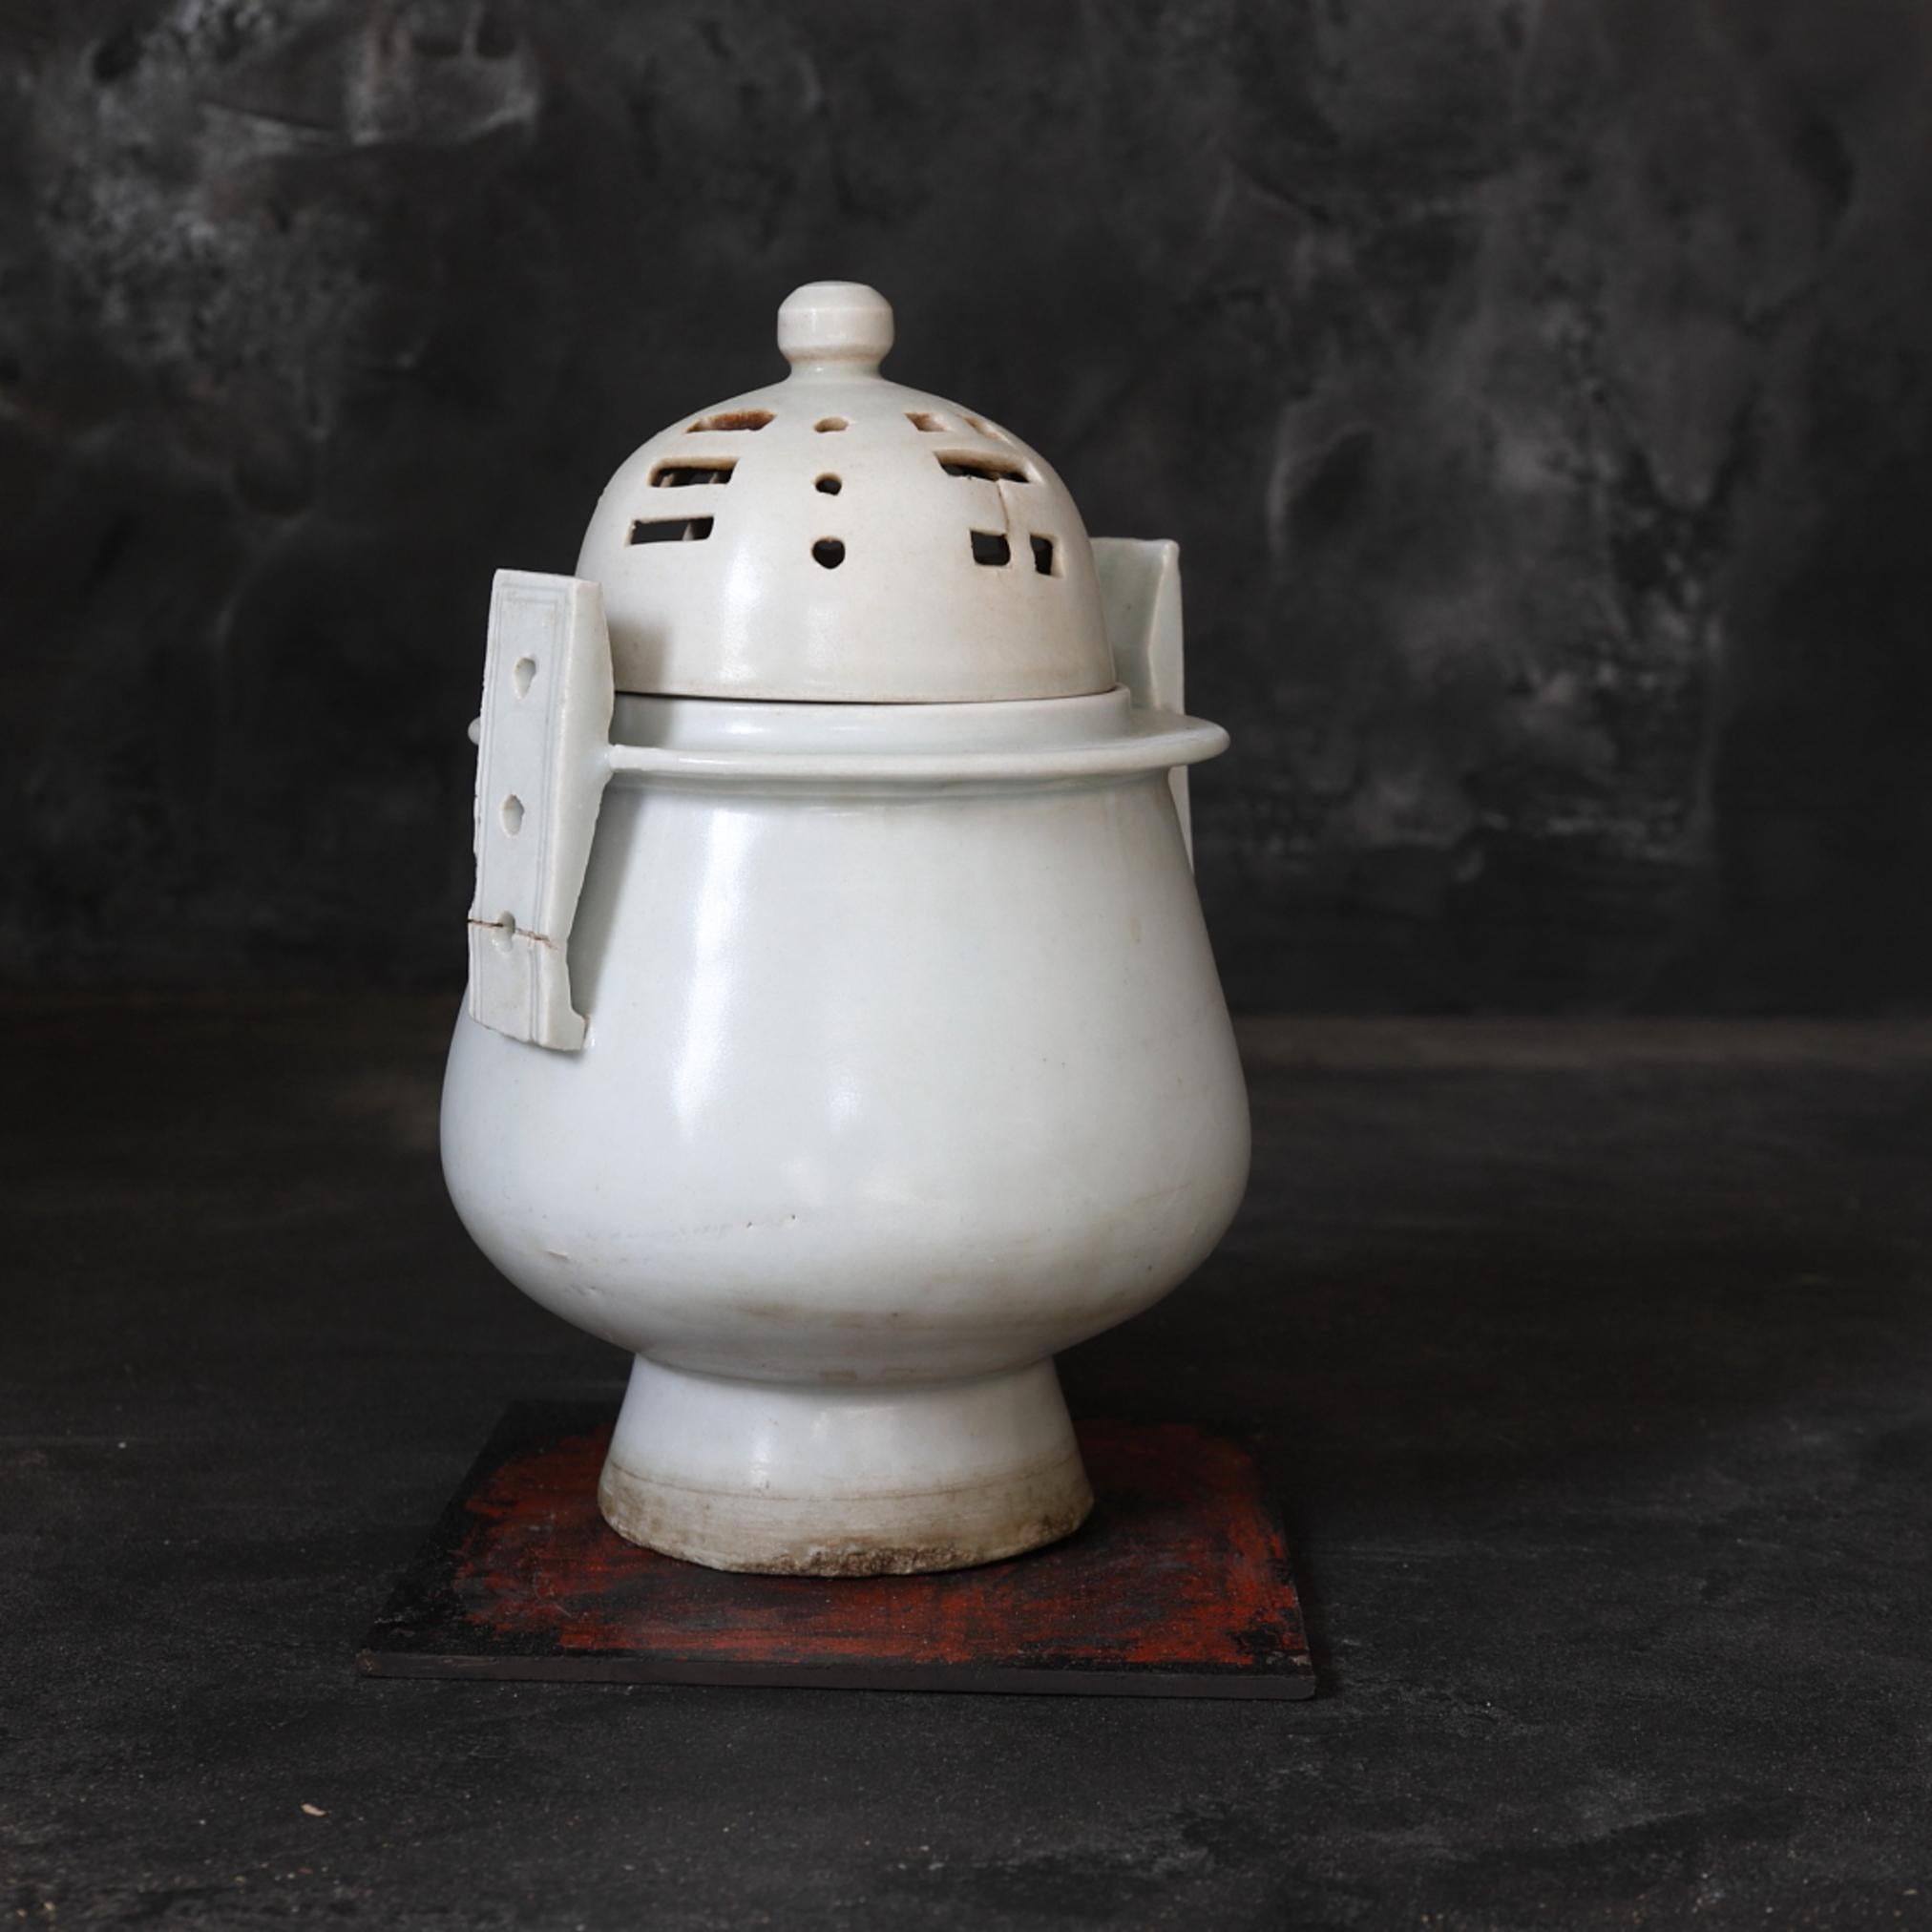 White Porcelain Incense Burner / Korean Antique / Joseon Dynasty/1392 - 1897 CE In Fair Condition For Sale In Kyoto-shi, Kyoto